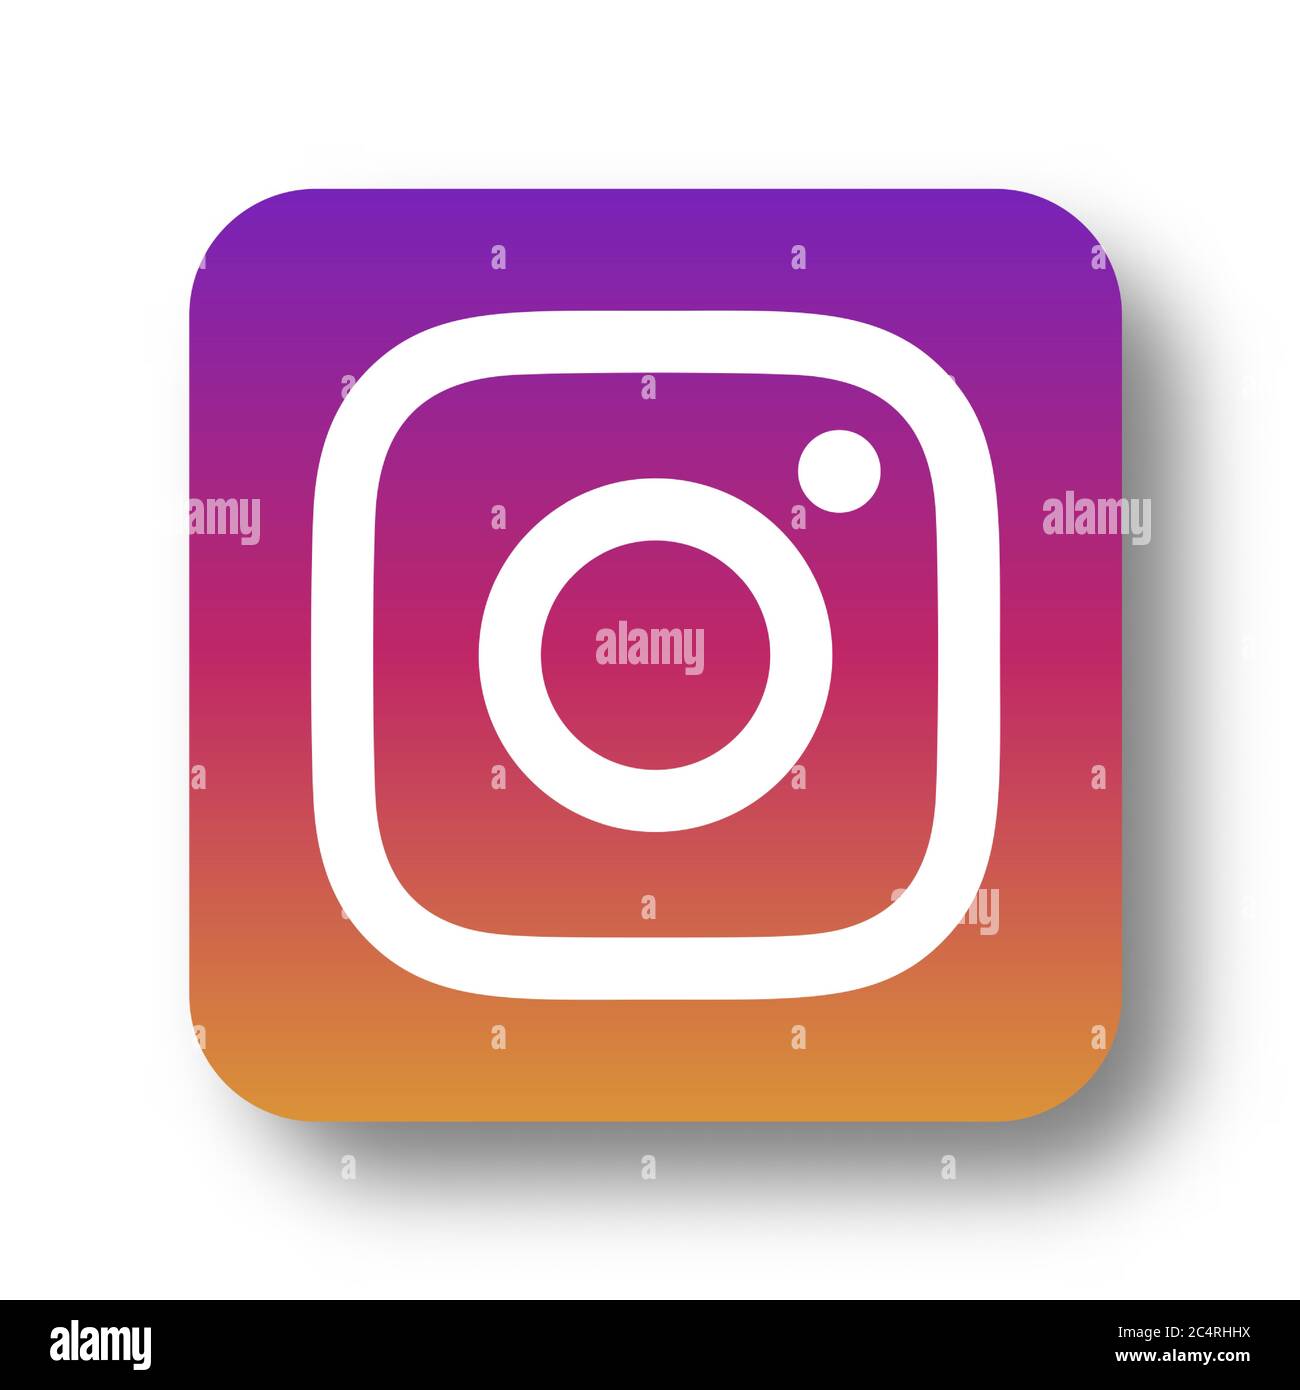 VORONEZH, RUSSIA - JANUARY 31, 2020: Instagram logo square icon with soft shadow Stock Vector